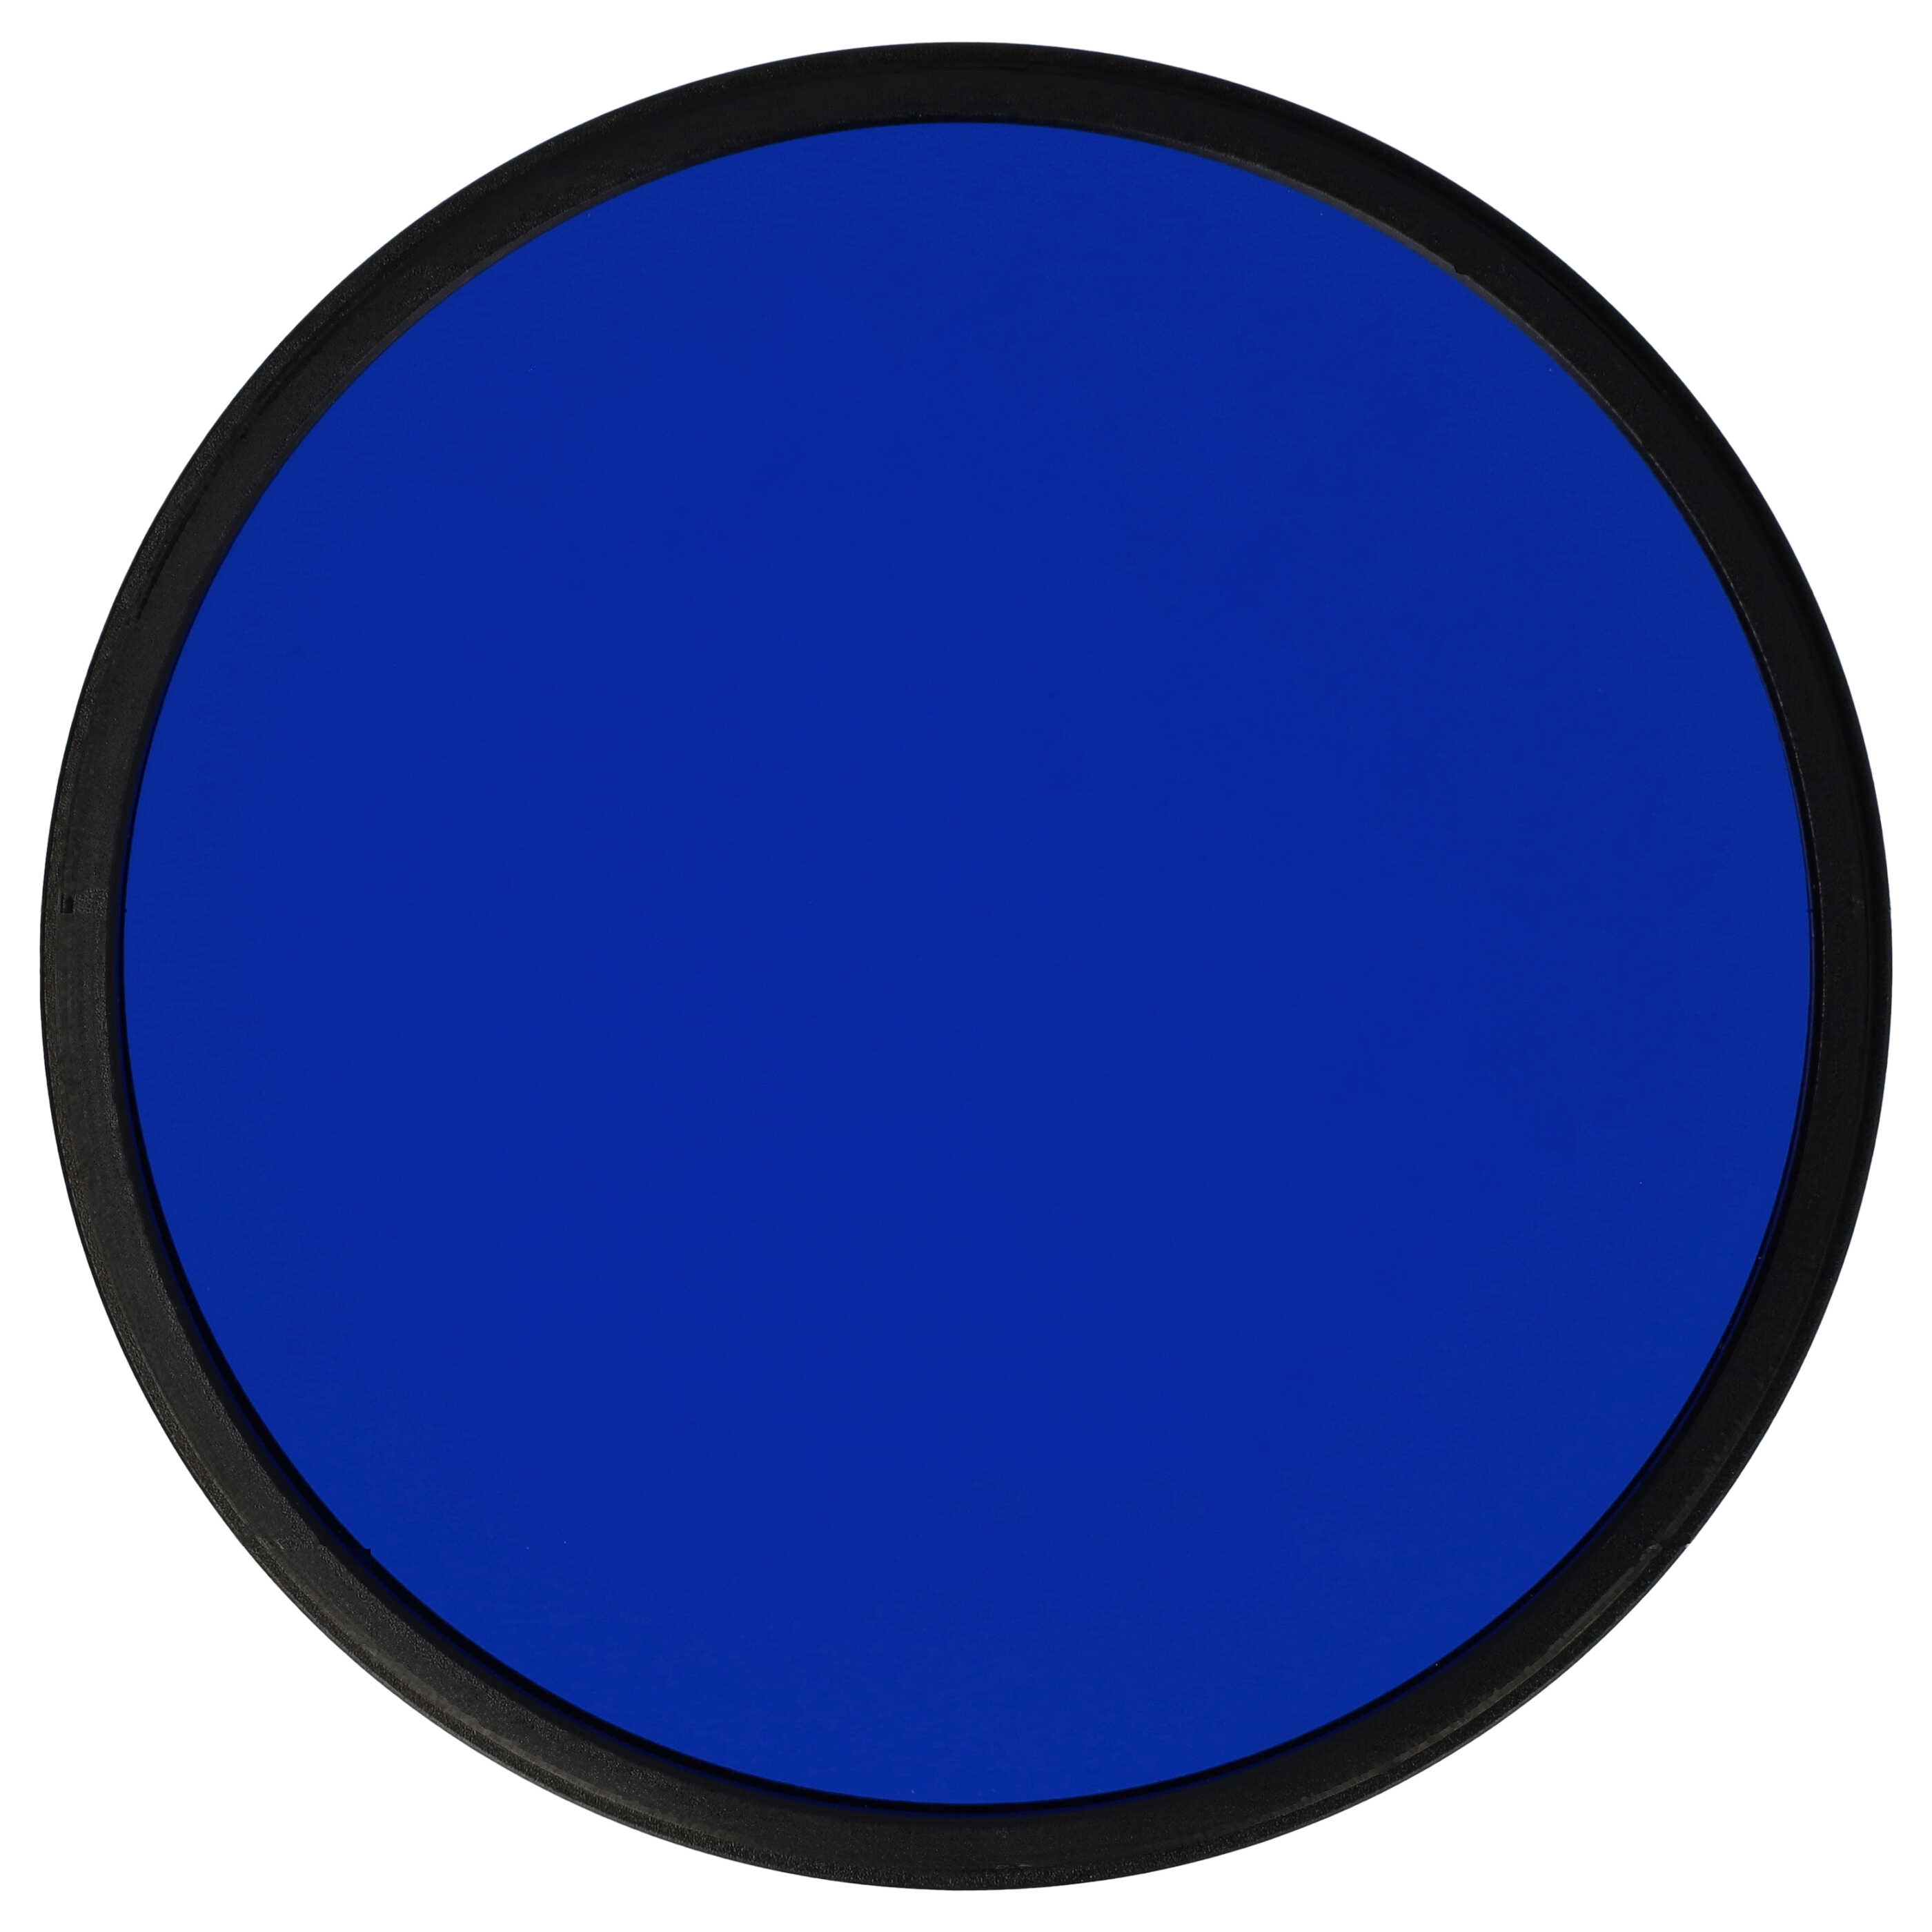 Coloured Filter, Blue suitable for Camera Lenses with 77 mm Filter Thread - Blue Filter